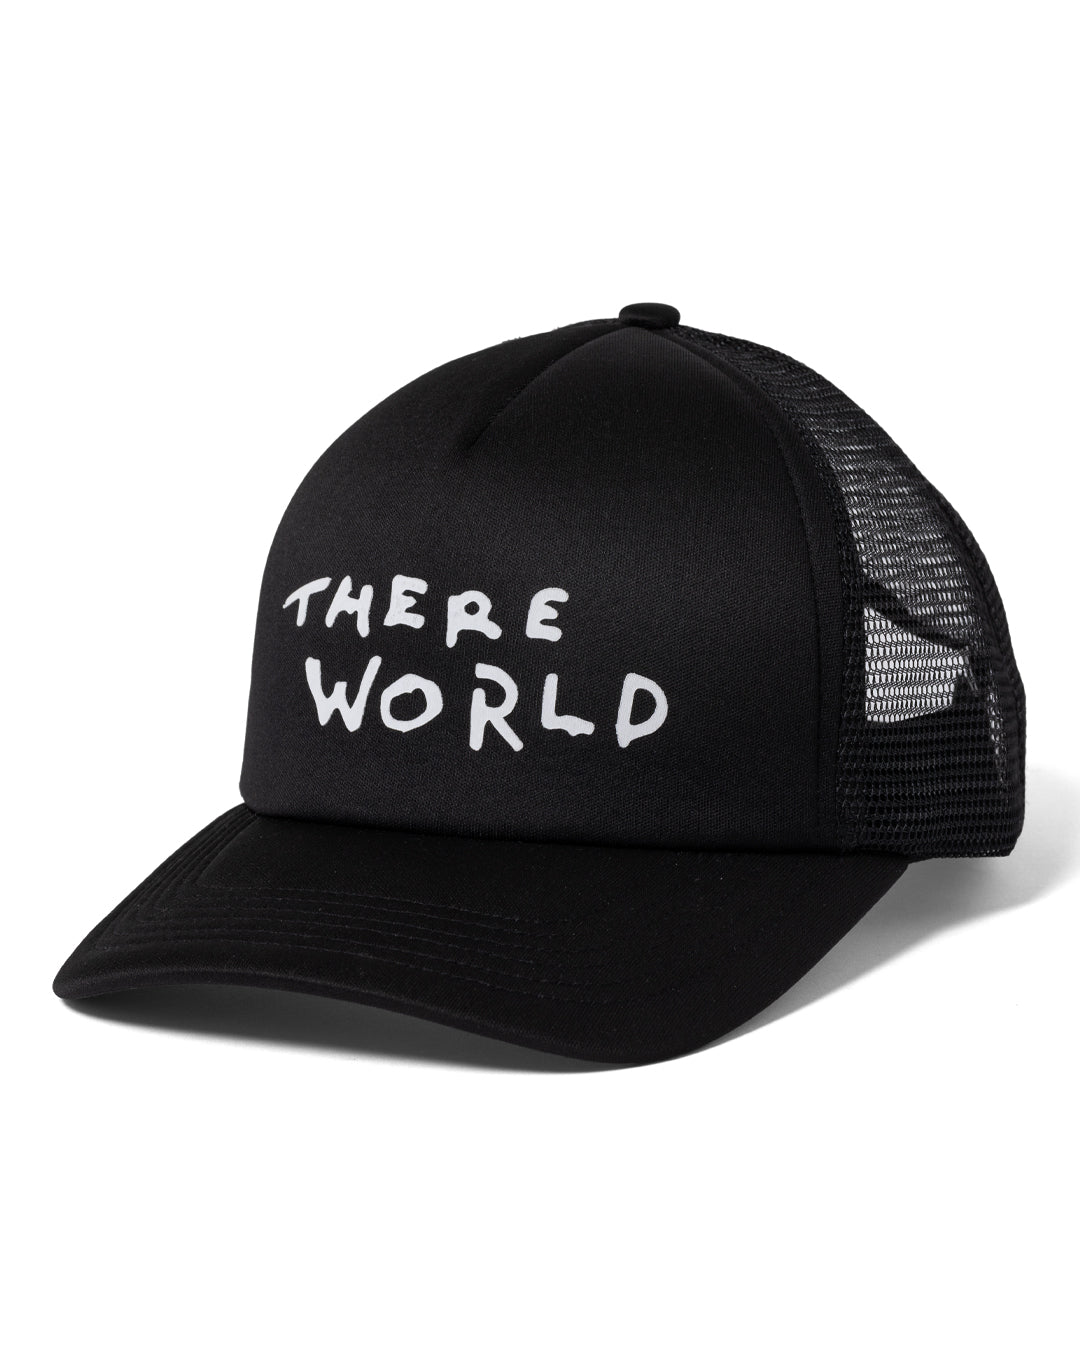 "There World" Trucker Hat